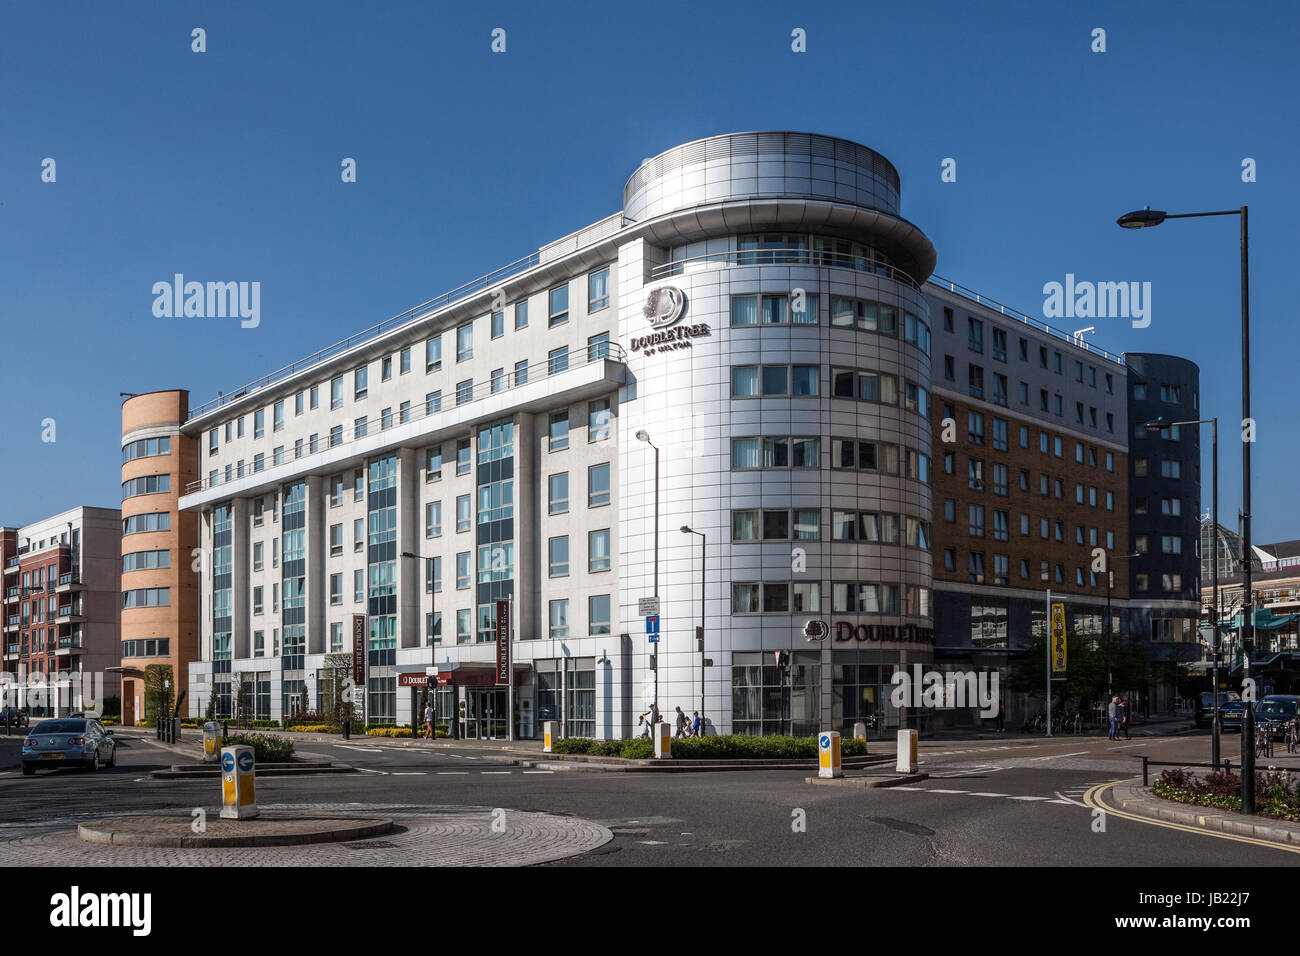 Double Tree by Hilton Hotel Imperial Road, Fulham, Londra Foto Stock